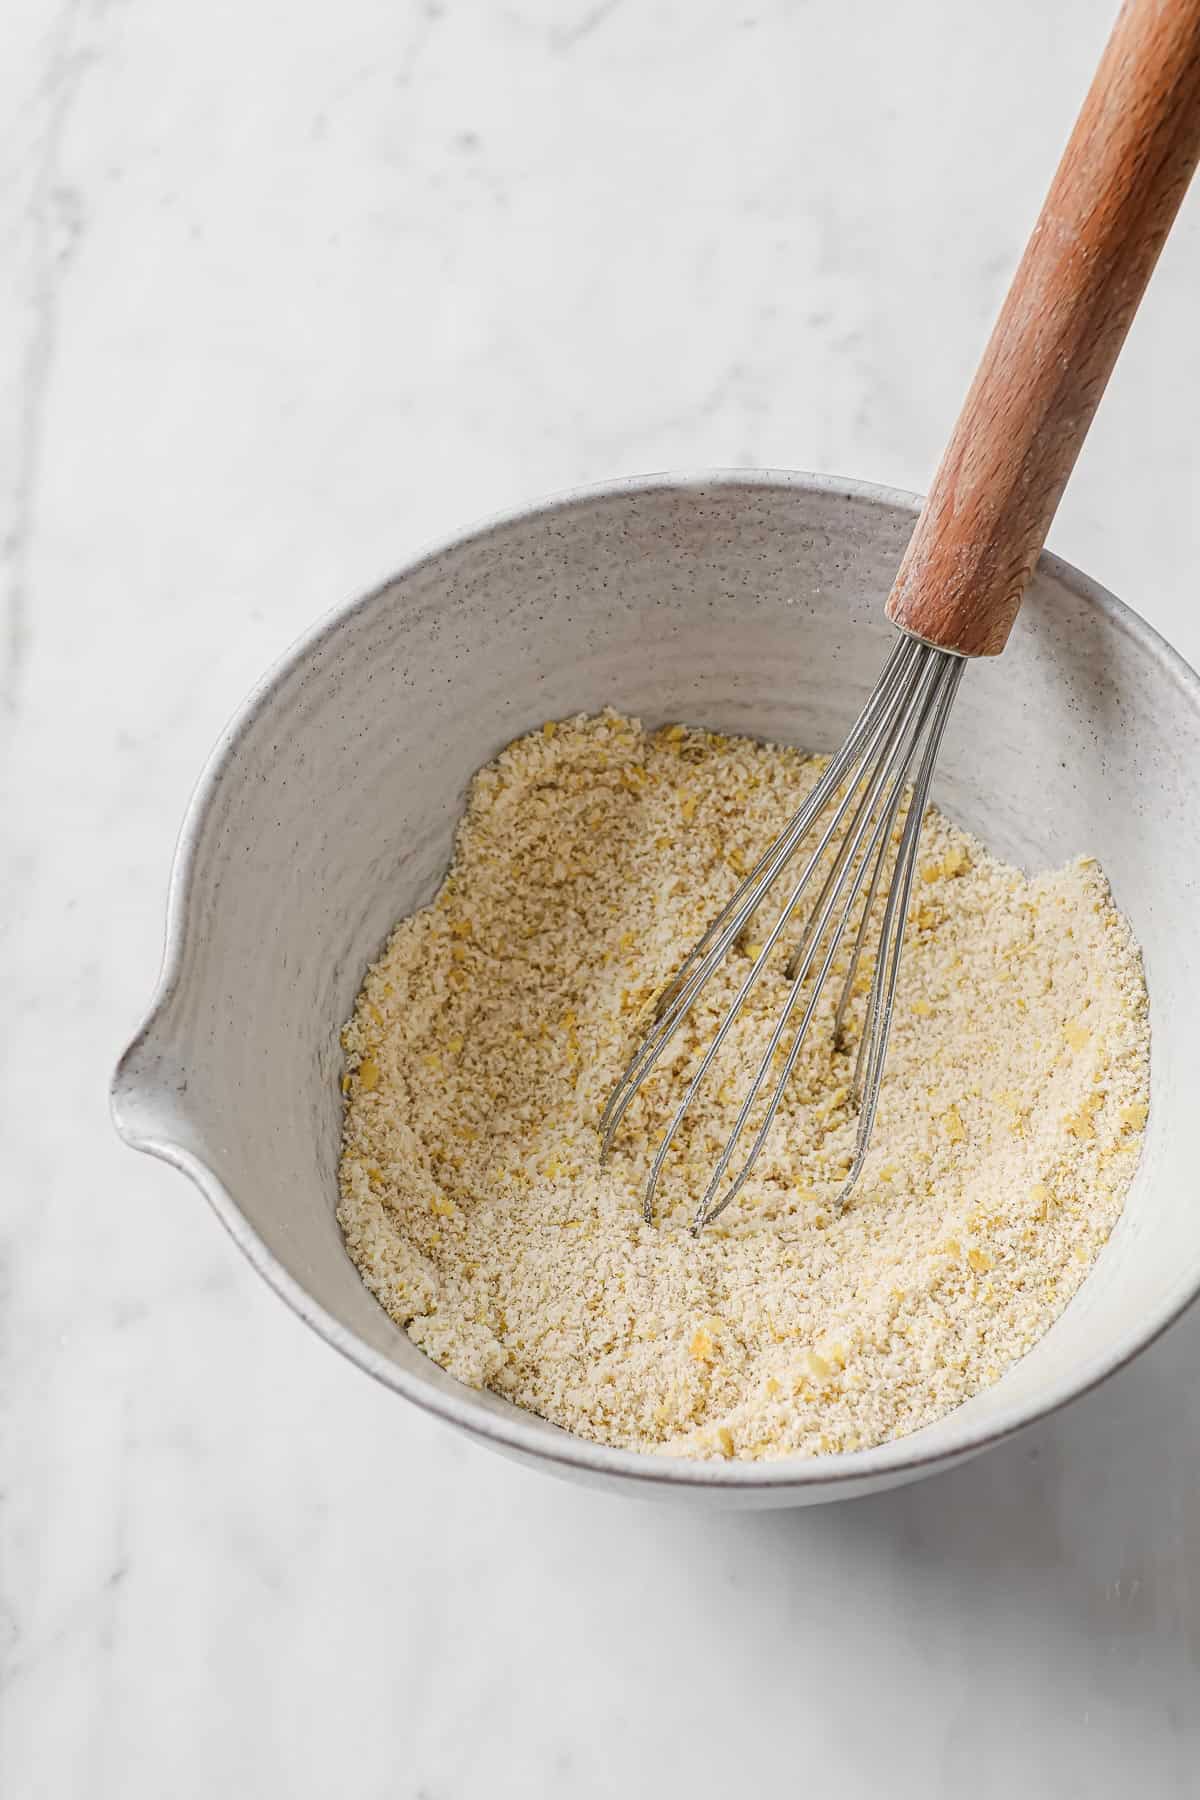 Dry ingredients for a keto bread recipe in a mixing bowl, with a whisk